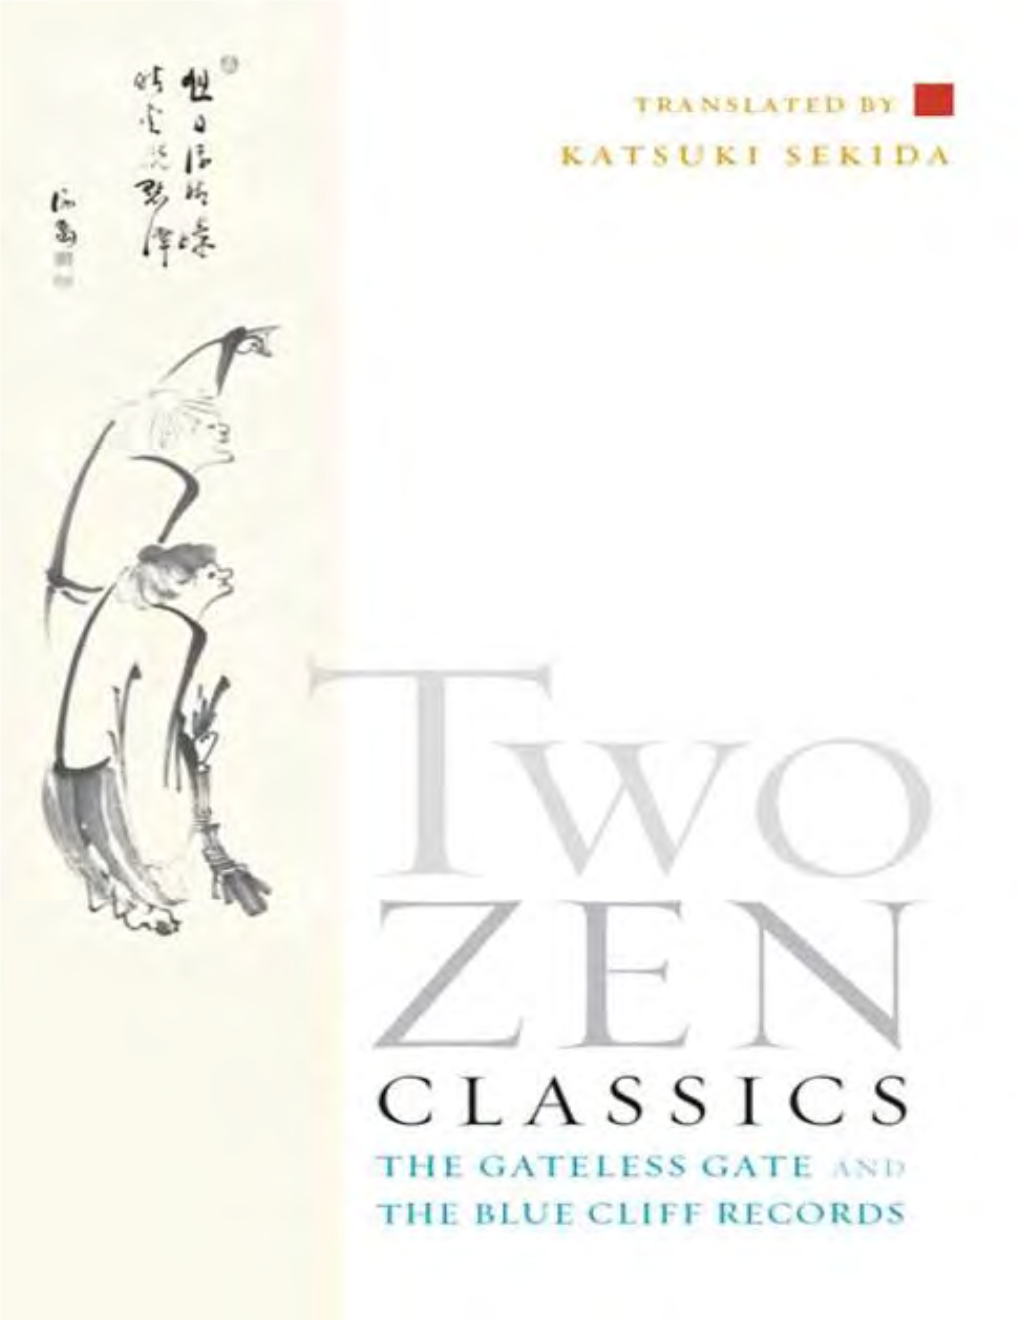 Two Zen Classics Is a Product of Herculean Labors, Wrought with Dedication and Understanding.” —Philip Kapleau